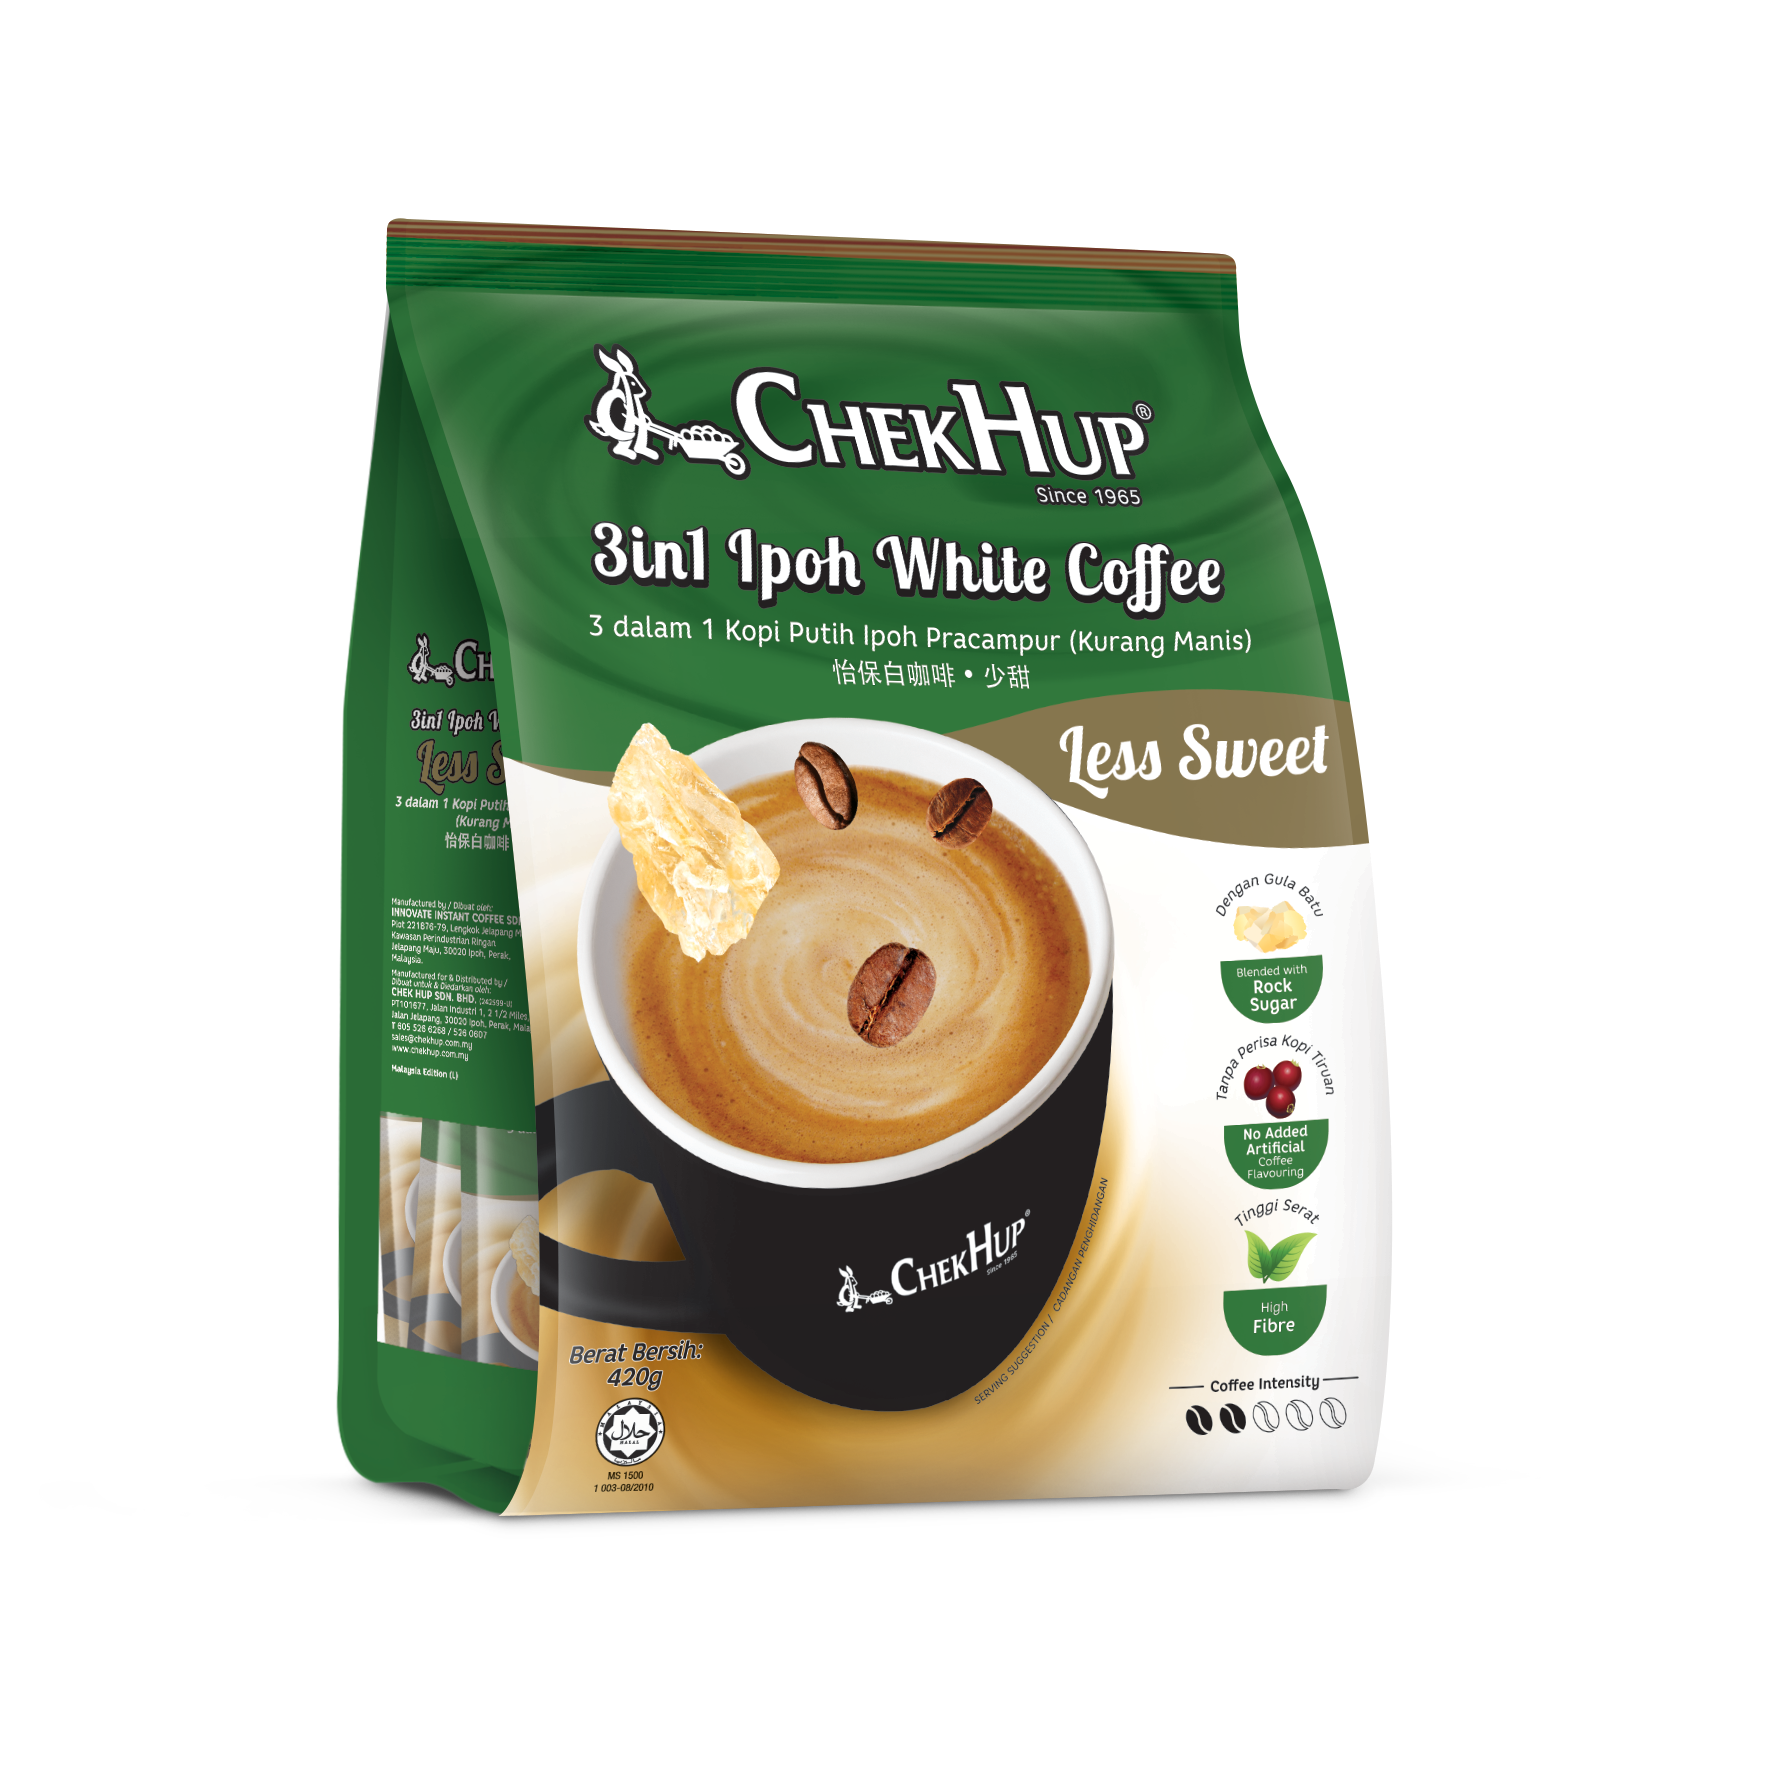 Chek Hup Ipoh White Coffee [Bundle of 3] [Combo set of Original, Rich, and Less Sweet]